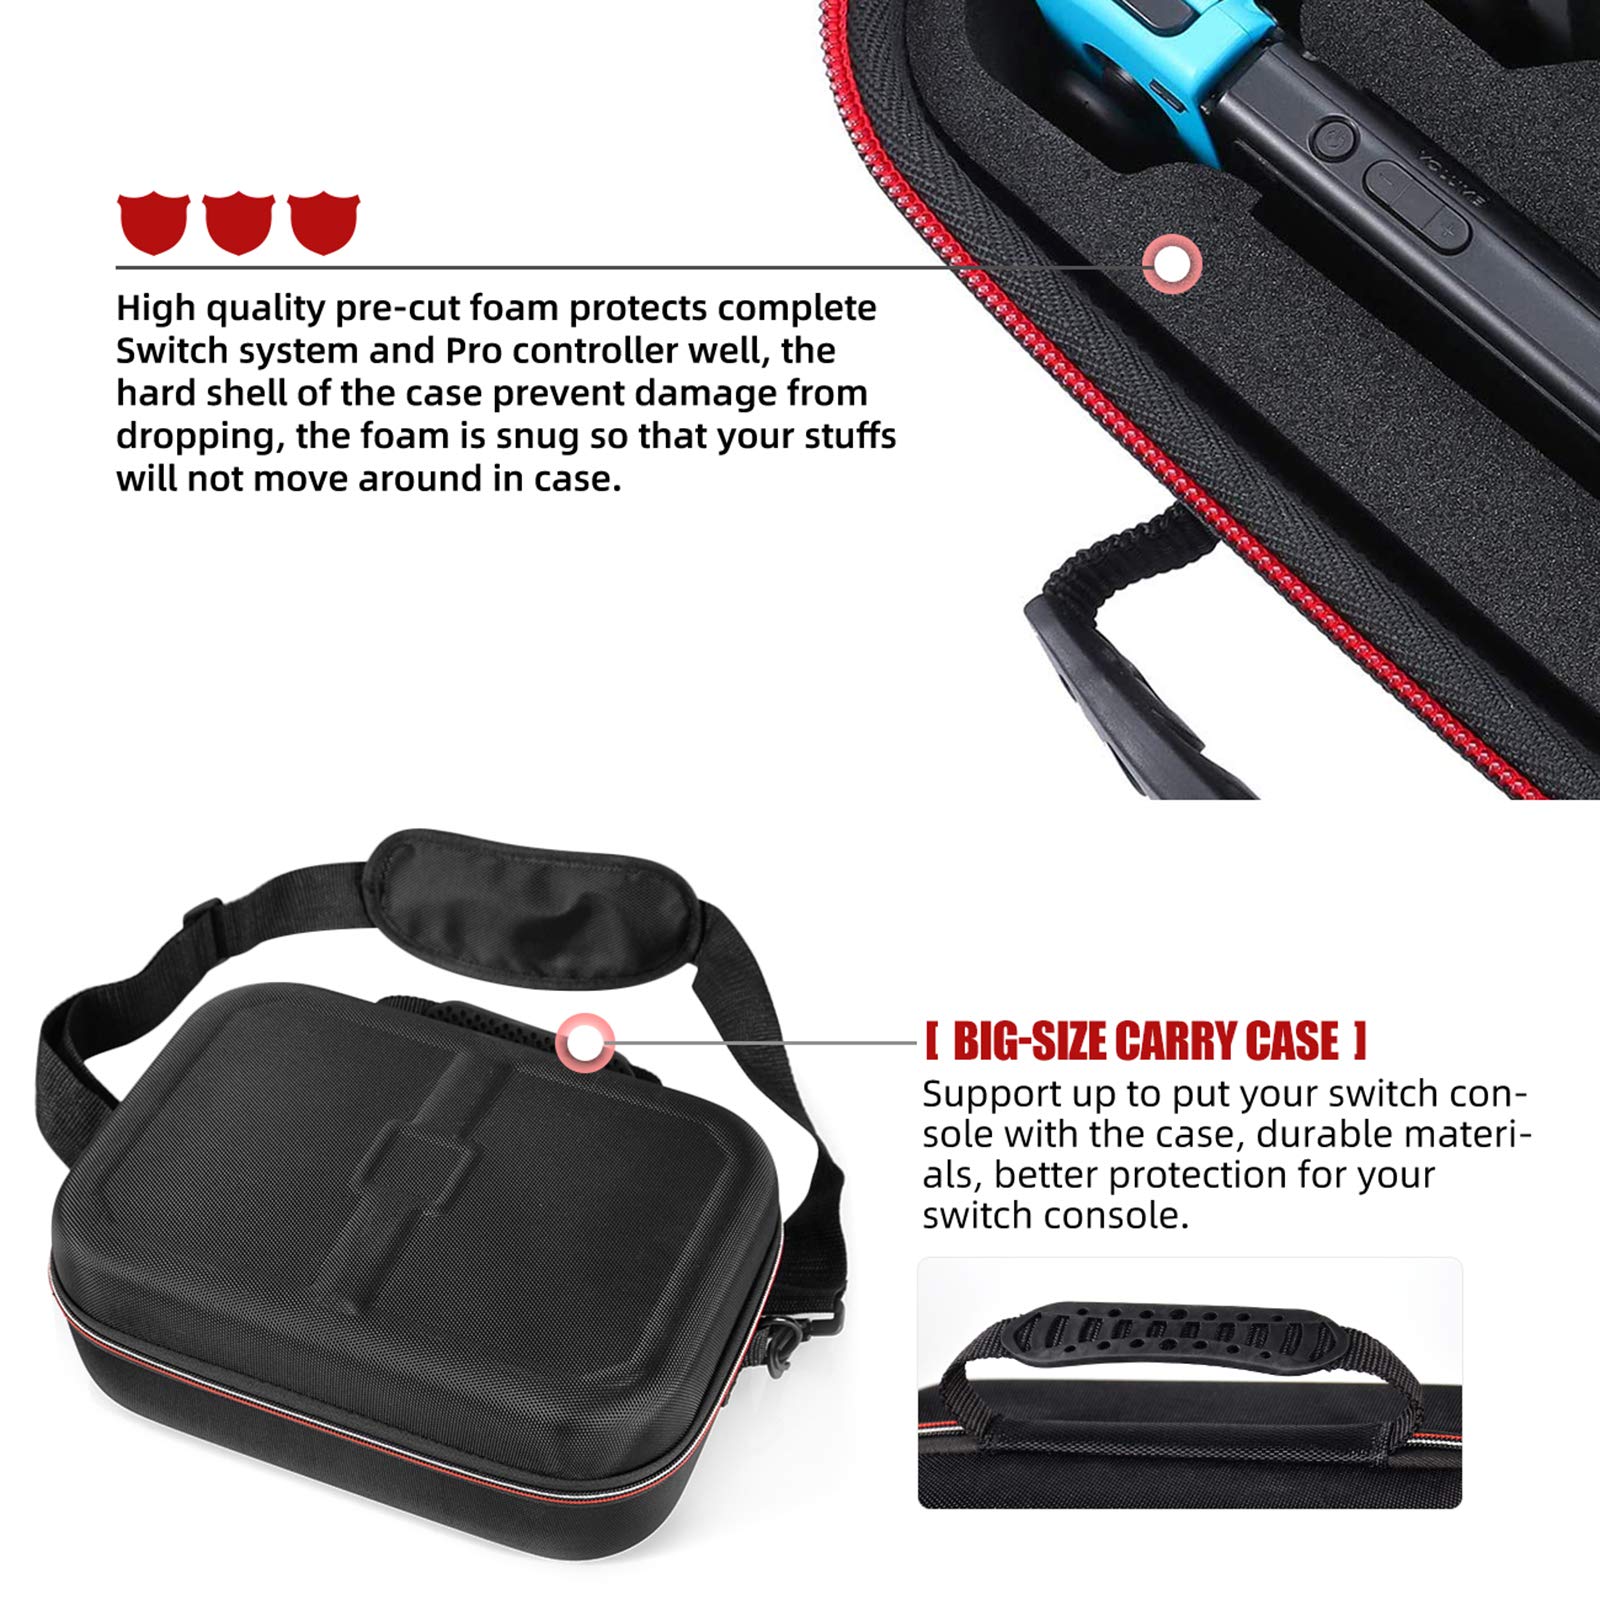 Deluxe Travel Carrying Case for Nintendo Switch / Switch Lite, Sturdy Hard Shell Carrying Bag for Storage Switch Console, Dock, Pro Controller, Accessories with Shoulder Strap 18 Game Cards Slot